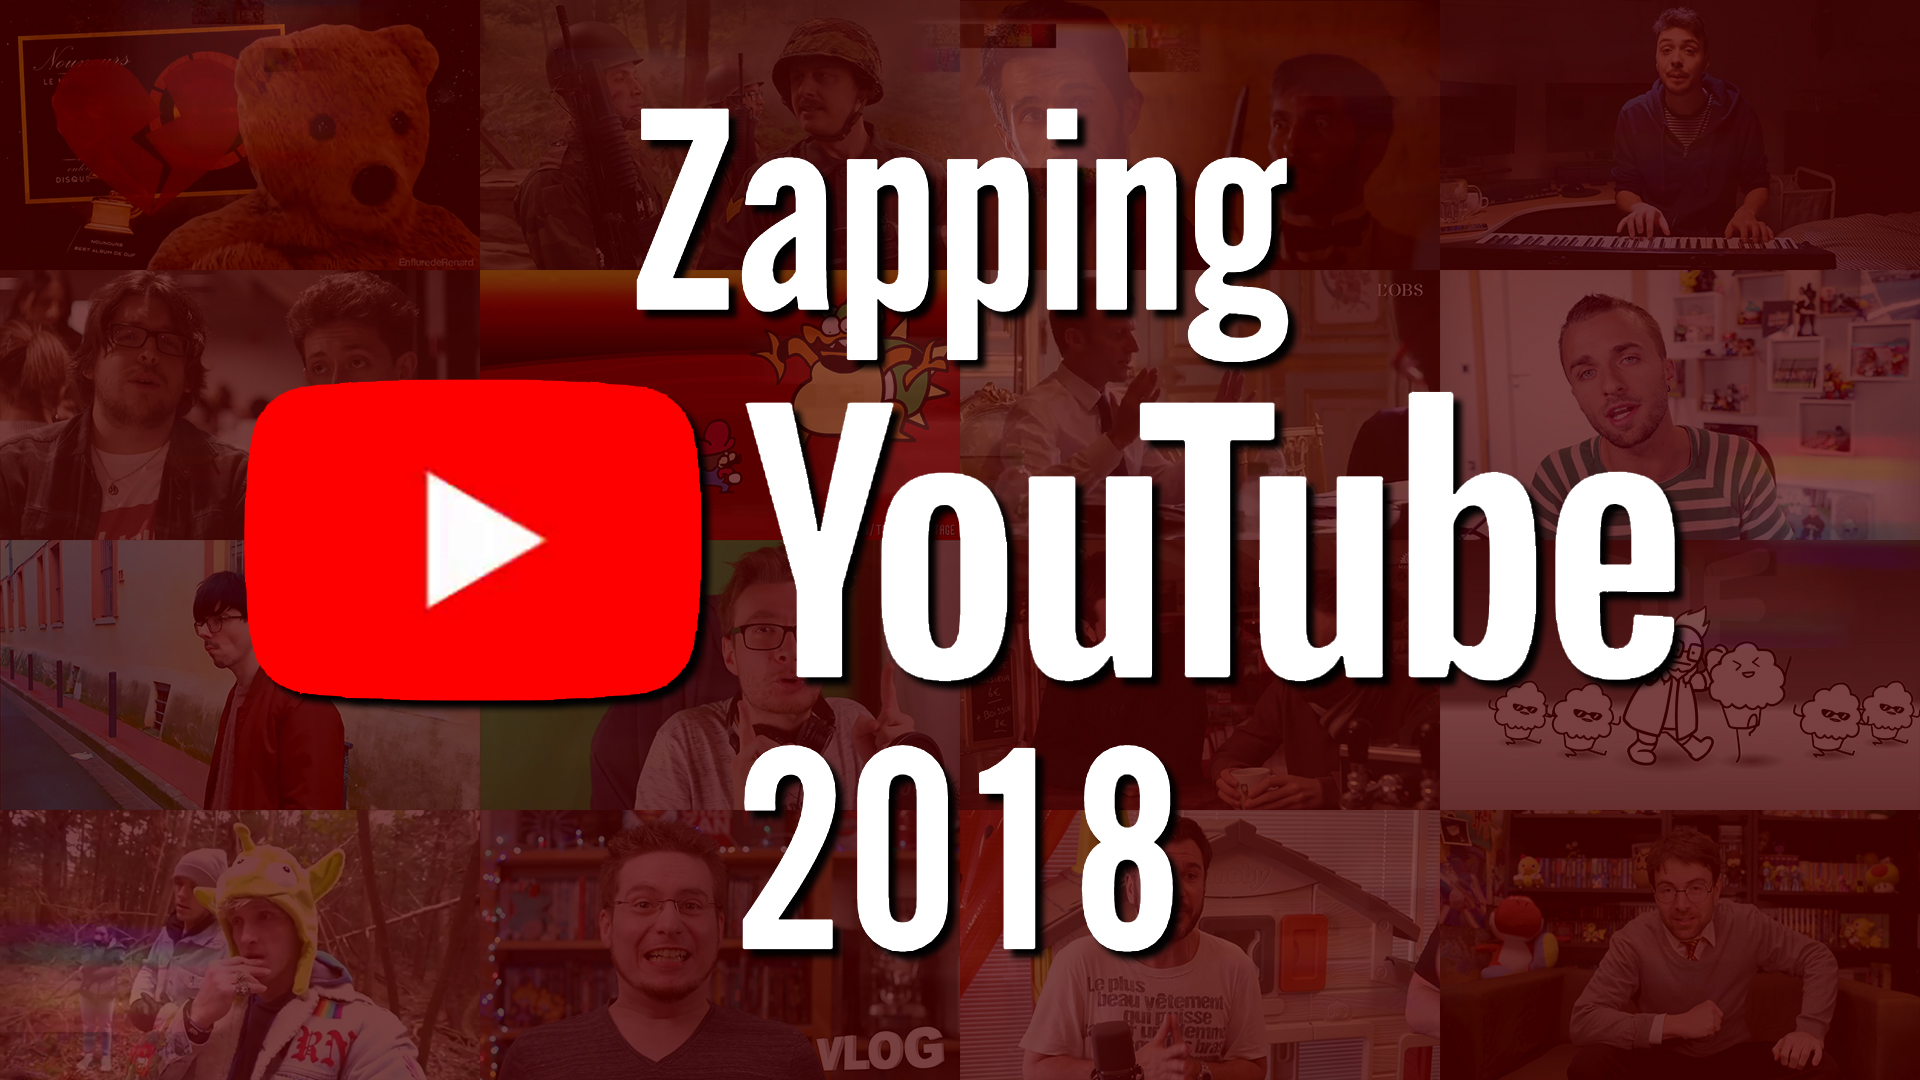 Zapping YouTube 2018